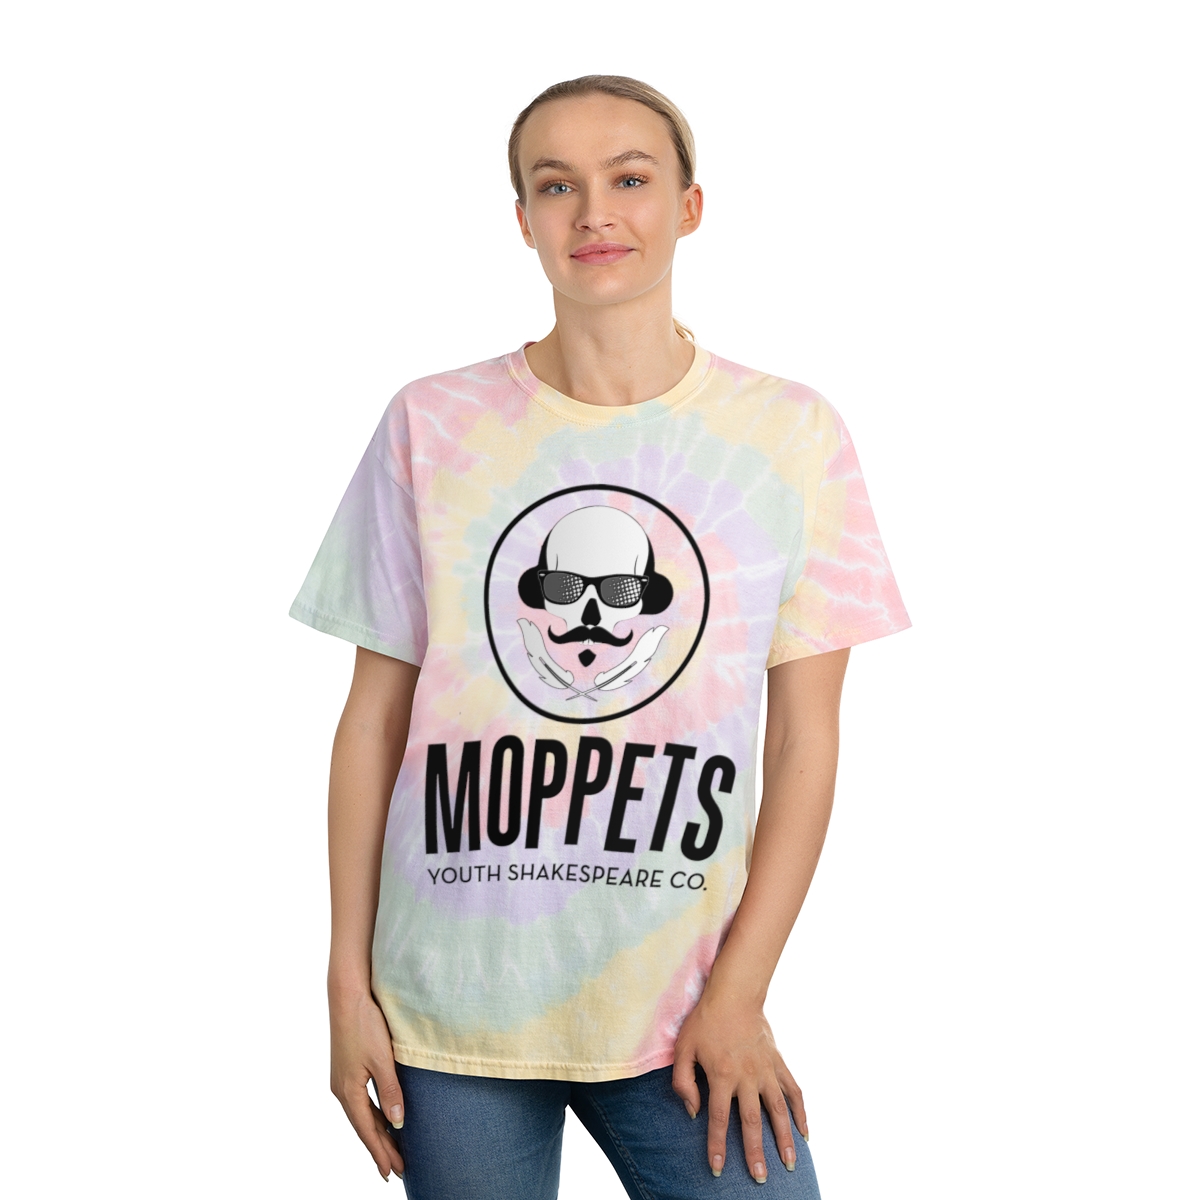 The Moppets present: A very colorful T-shirt product main image